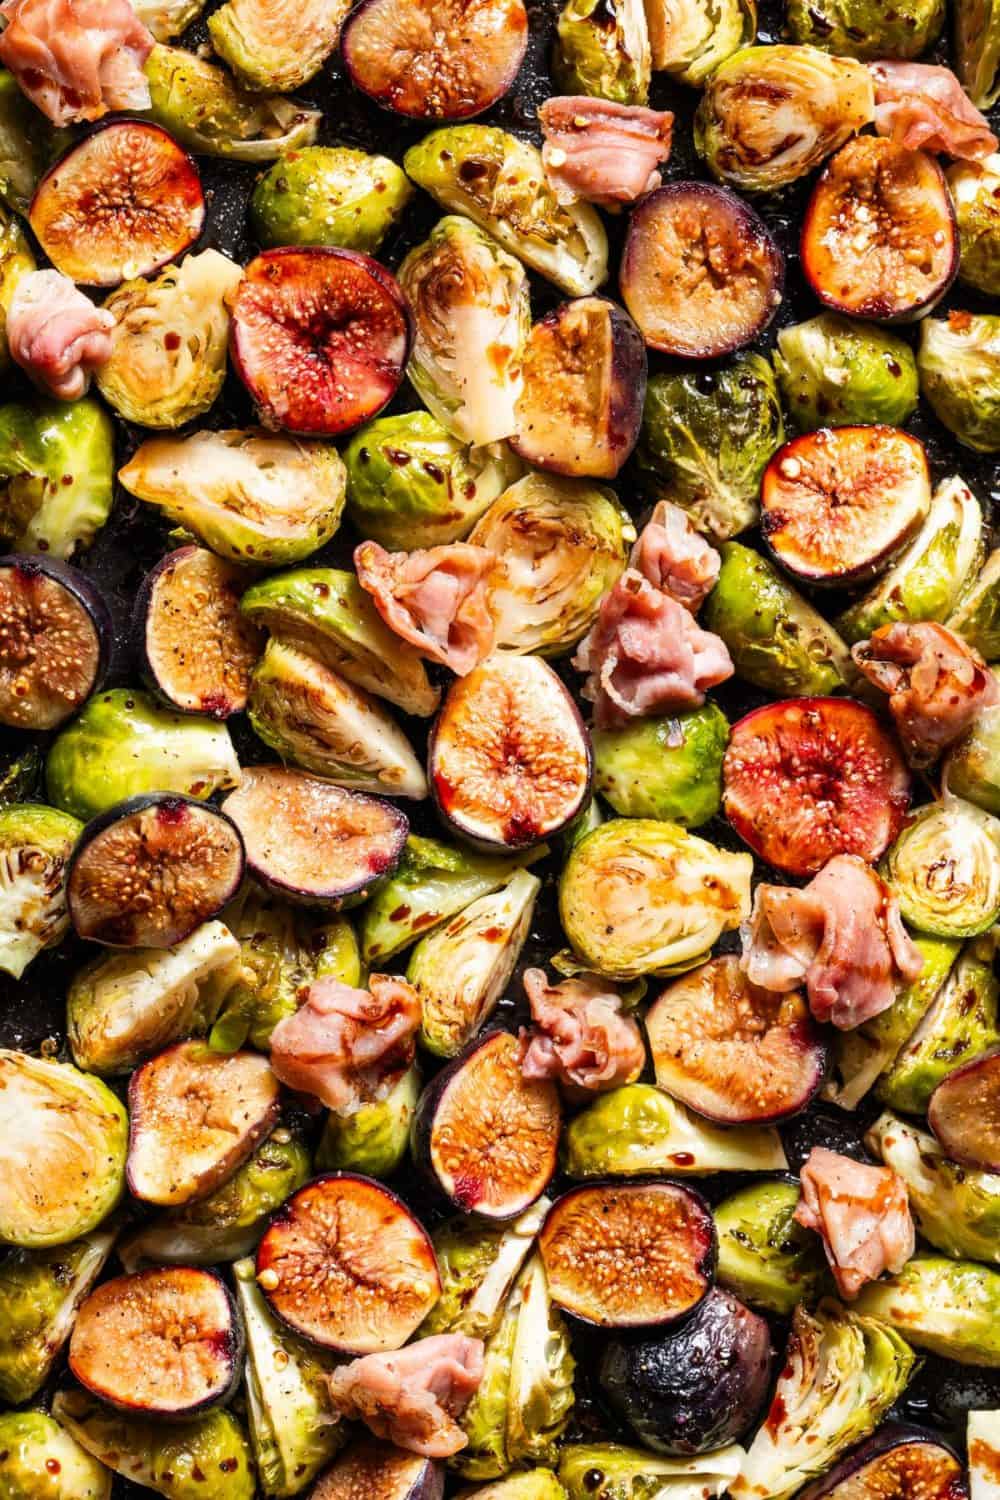 roasted figs and Brussels sprouts with prosciutto recipe for feature  - must credit grower and link to feature
Schafer family (fig growers) roasted figs and Brussels sprouts with prosciutto 